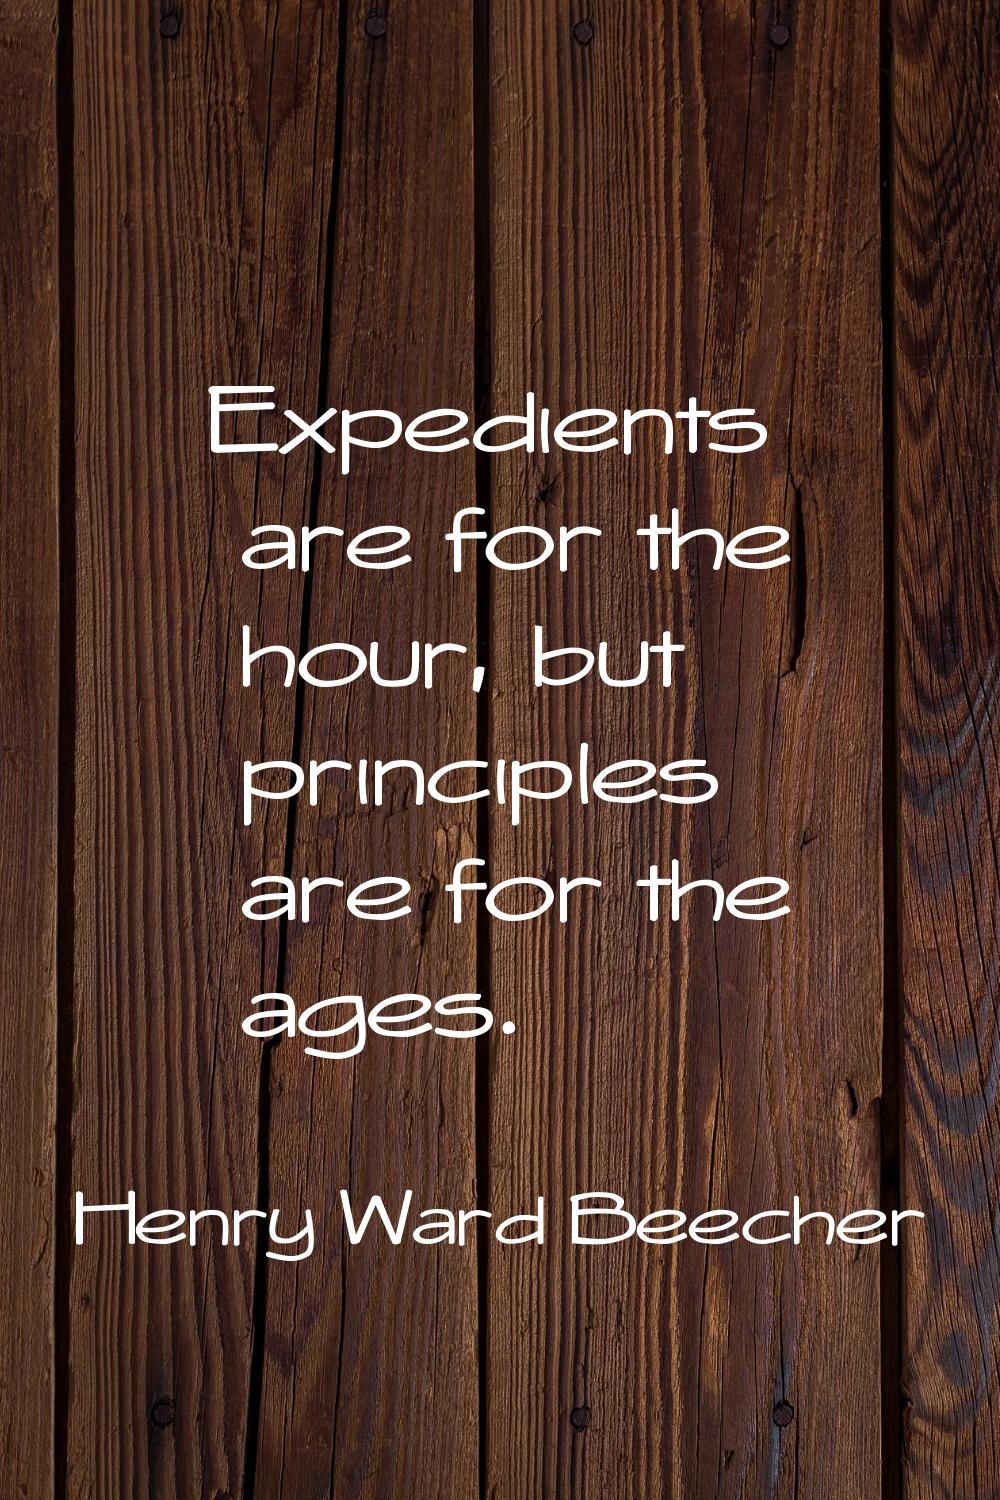 Expedients are for the hour, but principles are for the ages.